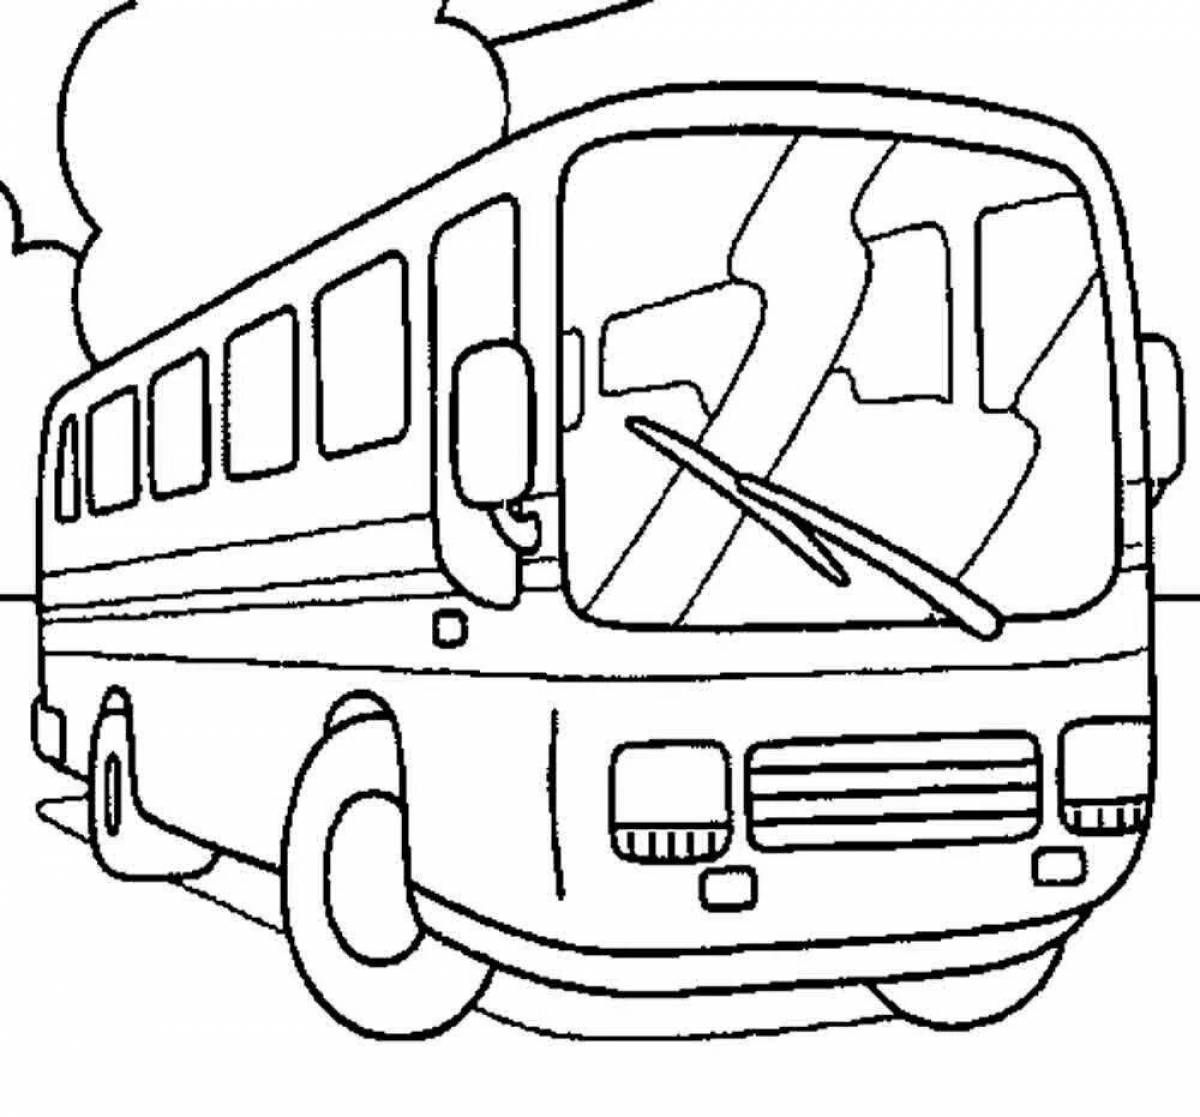 Vibrant bus coloring book for 4-5 year olds